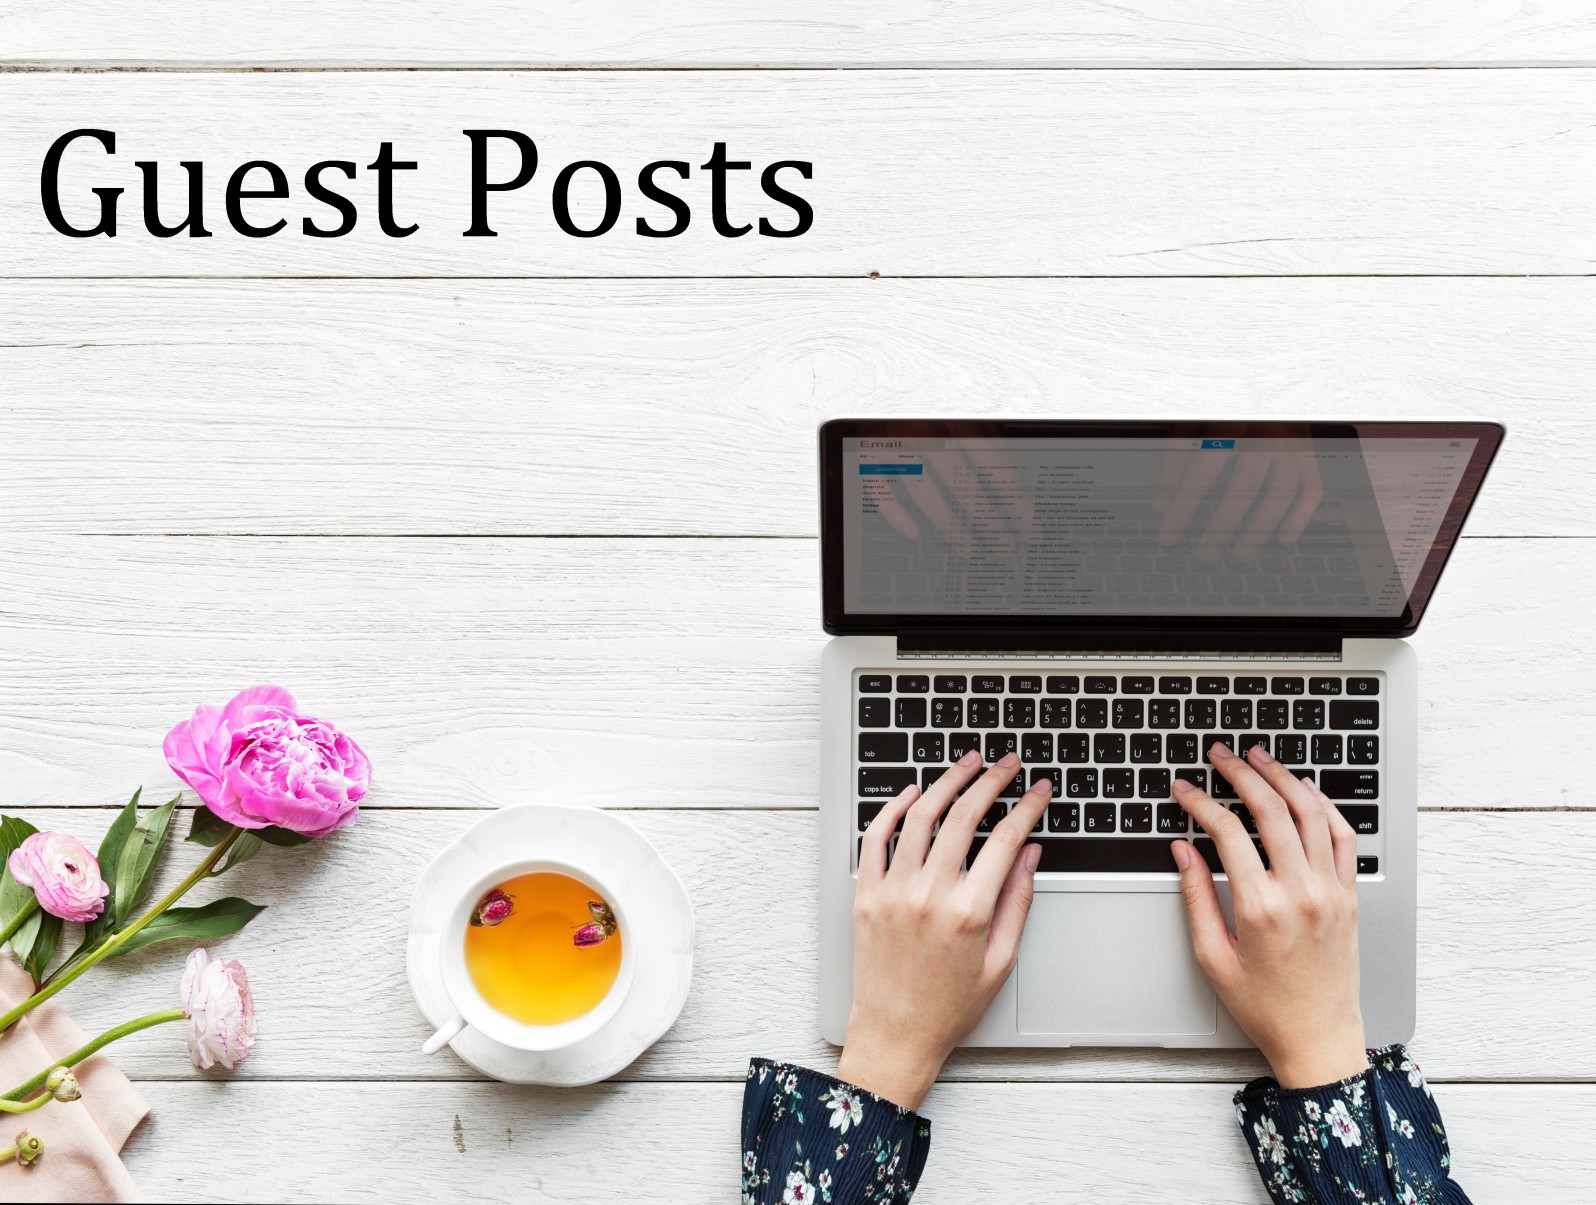 How to Feature guest posts from experts in the corporate industry